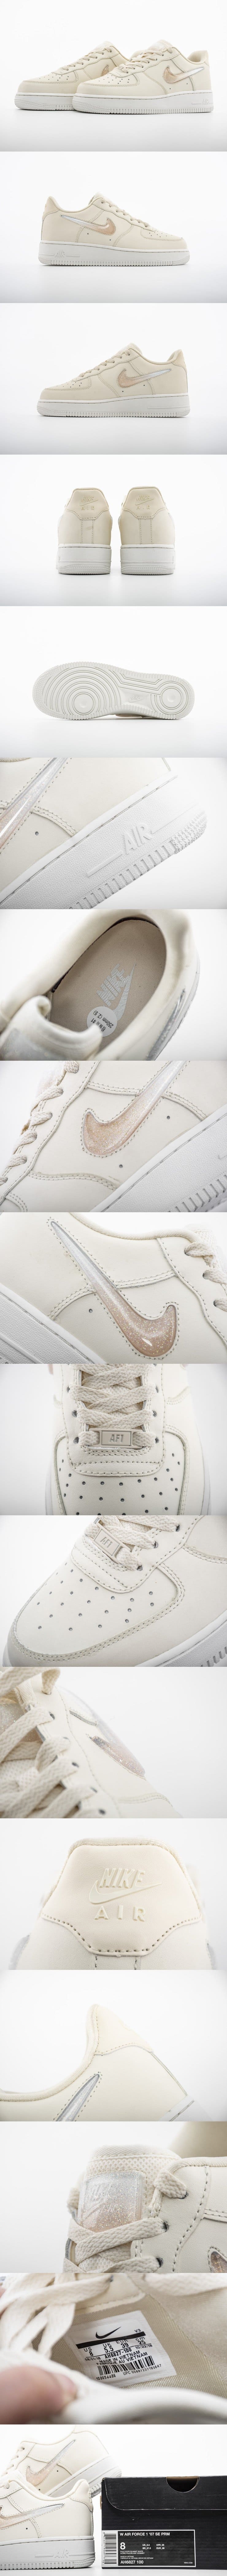 Nike Air Force1 Wmns Jelly Puff AH6827100 AT4143-400 ナイキ エアフォース1 ジェリーパフ